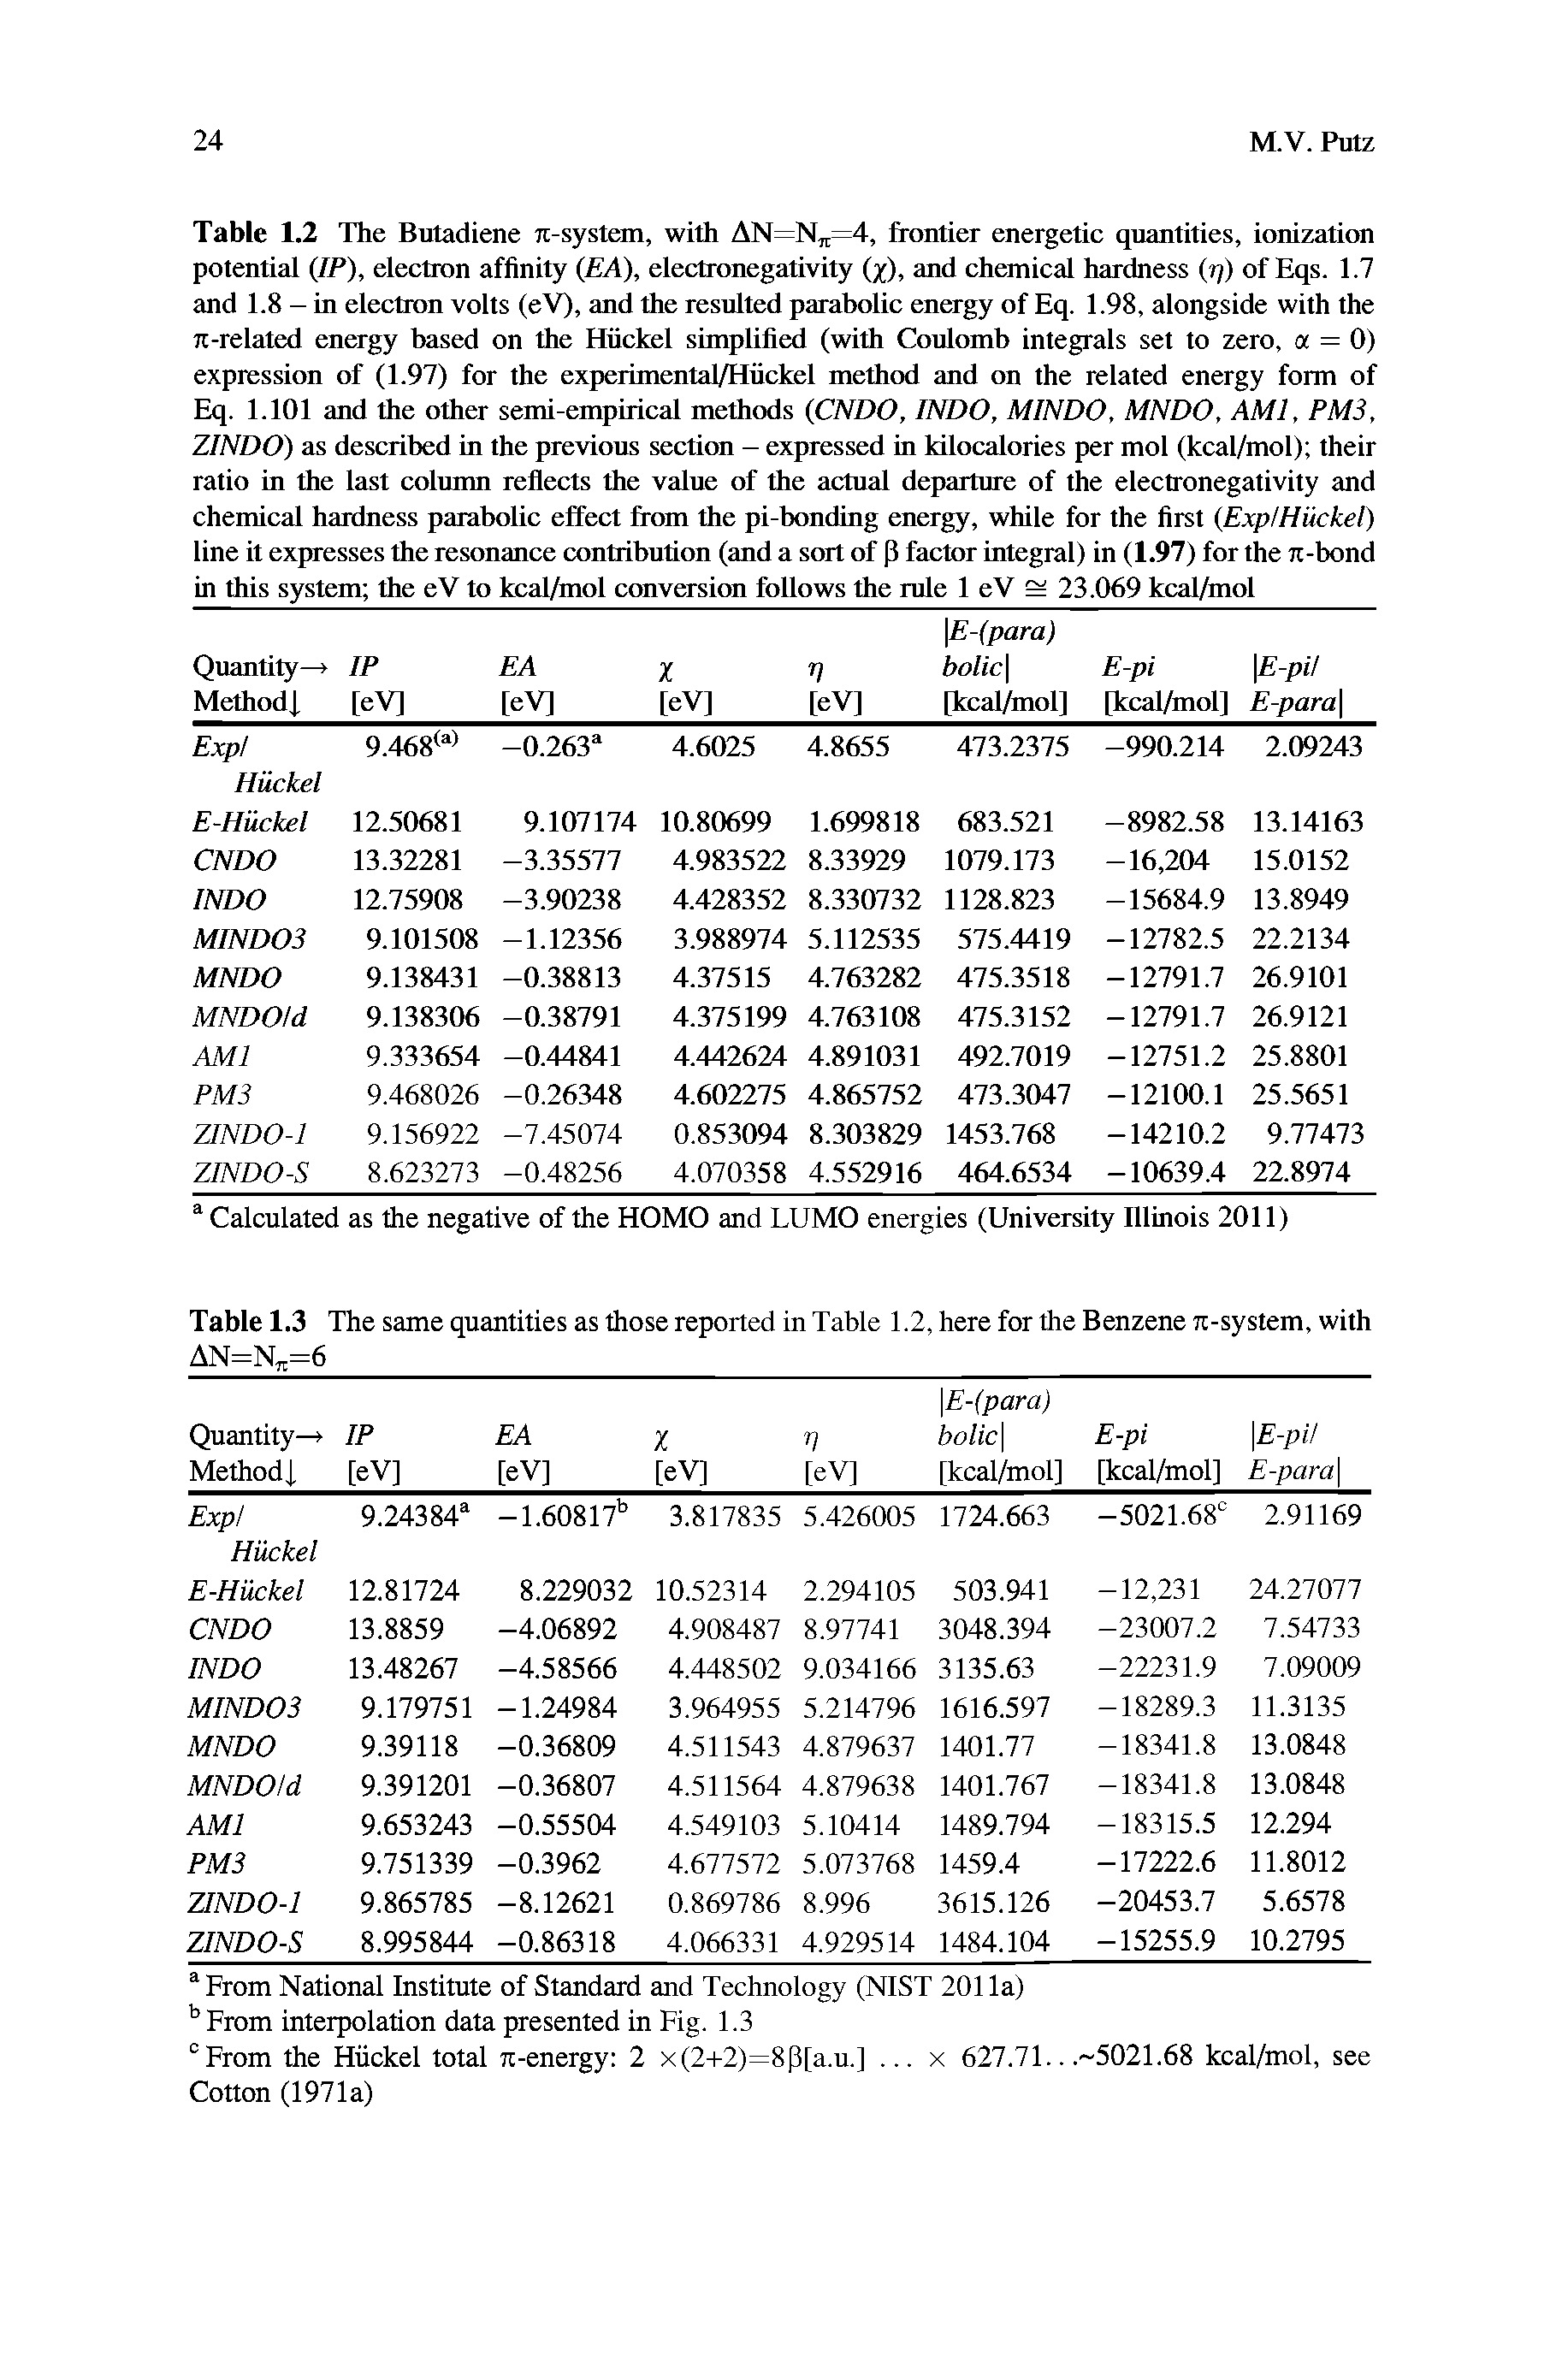 Table 1.2 The Butadiene tc-system, with AN=N =4, frontier energetic quantities, ionization potential IP), electron affinity EA), electronegativity (x), and chemical hardness (rj) of Eqs. 1.7 and 1.8 - in electron volts (eV), and the resulted parabolic energy of Eq. 1.98, alongside with the 7t-related energy based on the Hiickel simplified (with Coulomb integrals set to zero, a = 0) expression of (1.97) for the experimental/Hiickel method and on the related energy form of Eq. 1.101 and the other semi-empirical methods CNDO, INDO, MINDO, MNDO, AMI, PM3, ZINDO) as described in the previous section - expressed in kilocalories per mol (kcal/mol) their ratio in the last column reflects the value of the actual departure of the electronegativity and chemical hardness parabolic effect from the pi-bonding energy, while for the first (Exp Hiickel) line it expresses the resonance contribution (and a sort of P factor integral) in (1.97) for the tt-bond in this system the eV to kcal/mol conversion follows the rule 1 eV = 23.069 kcal/mol...